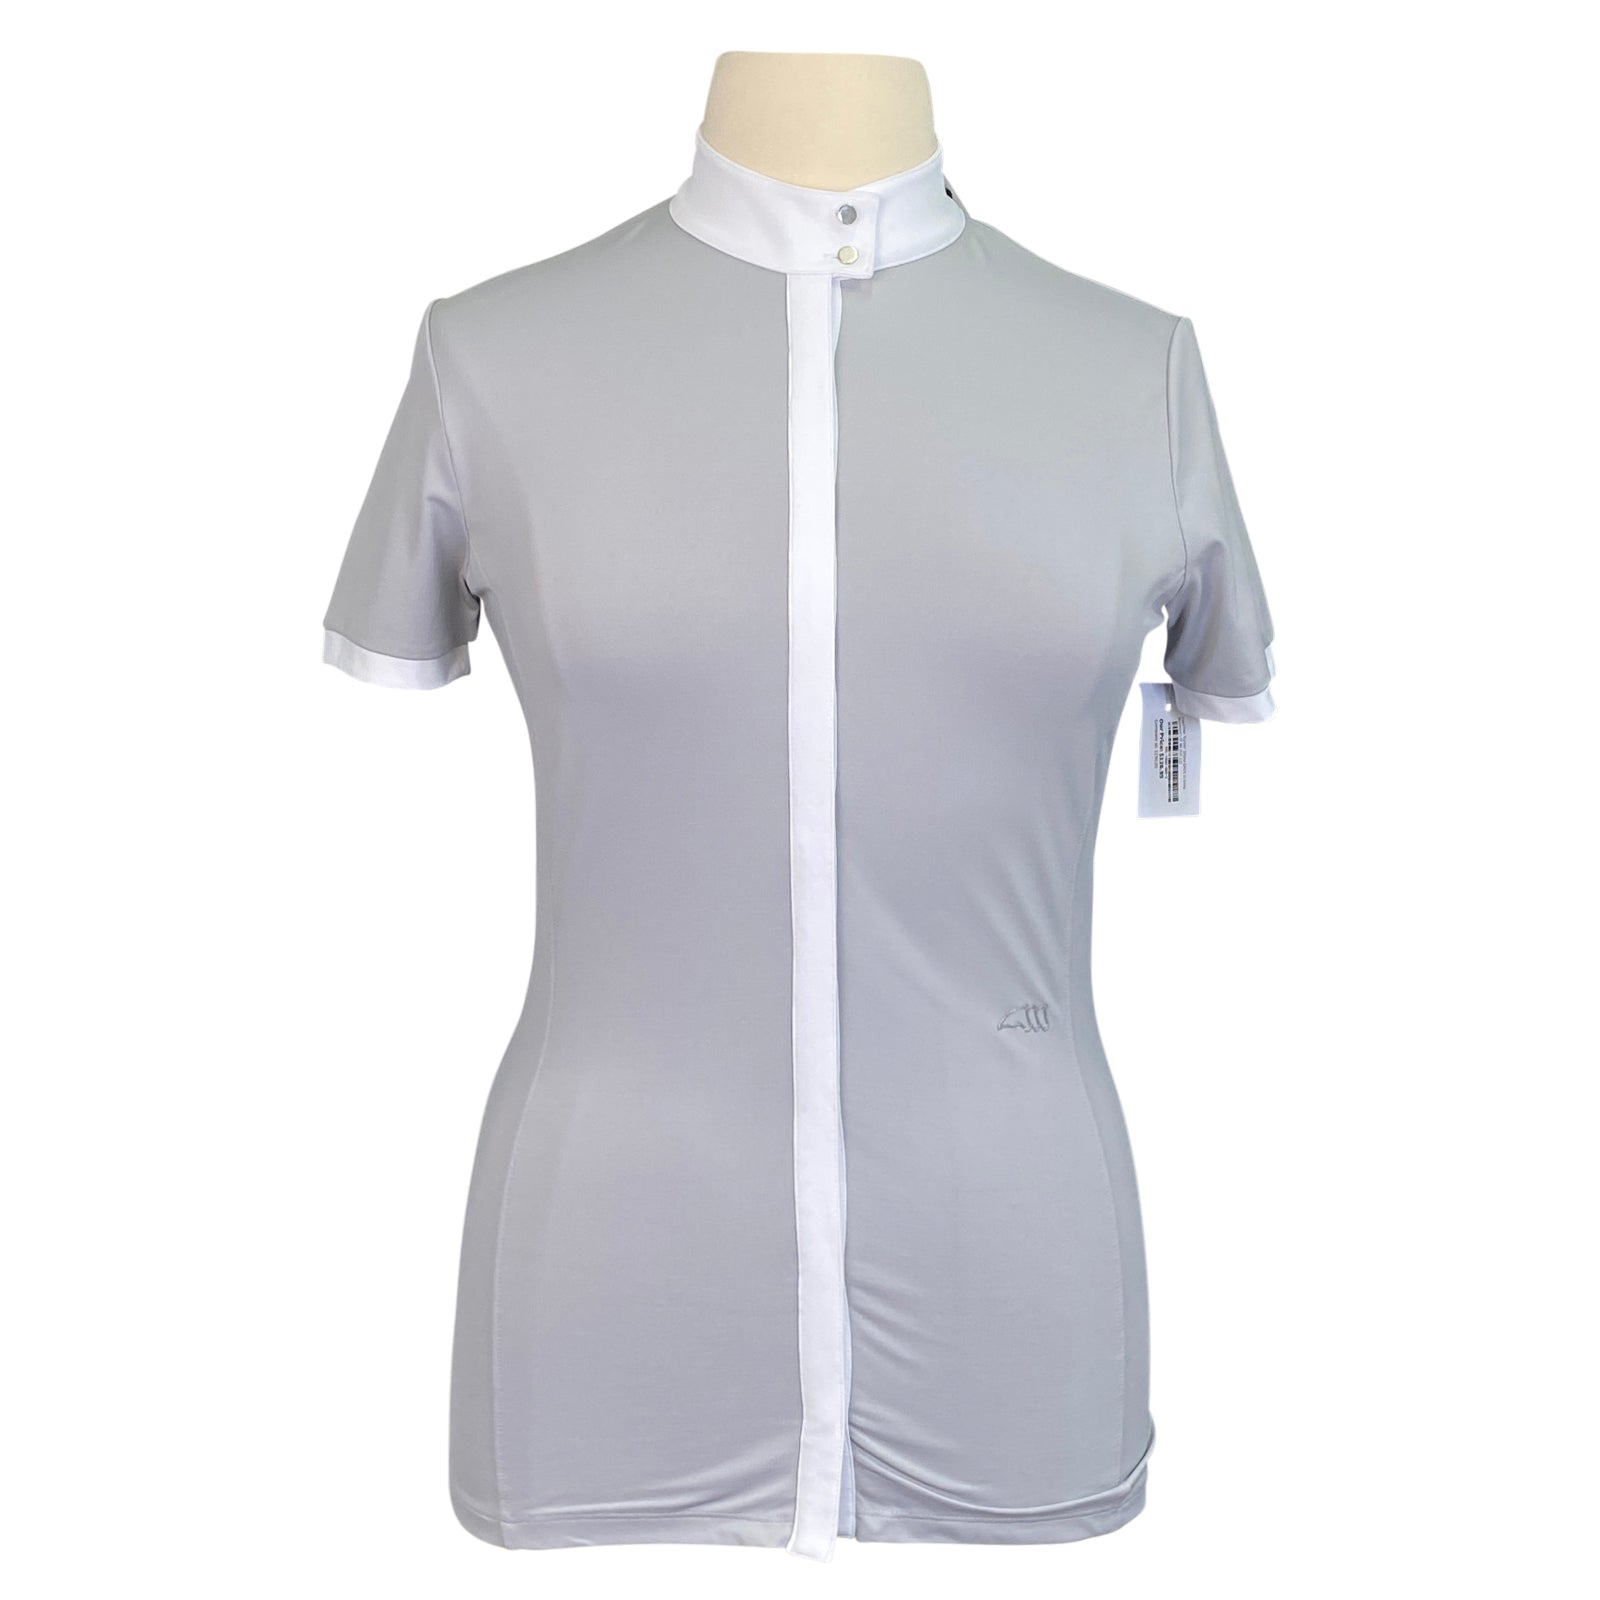 Equiline 'Eulae' Show Shirt in Grey